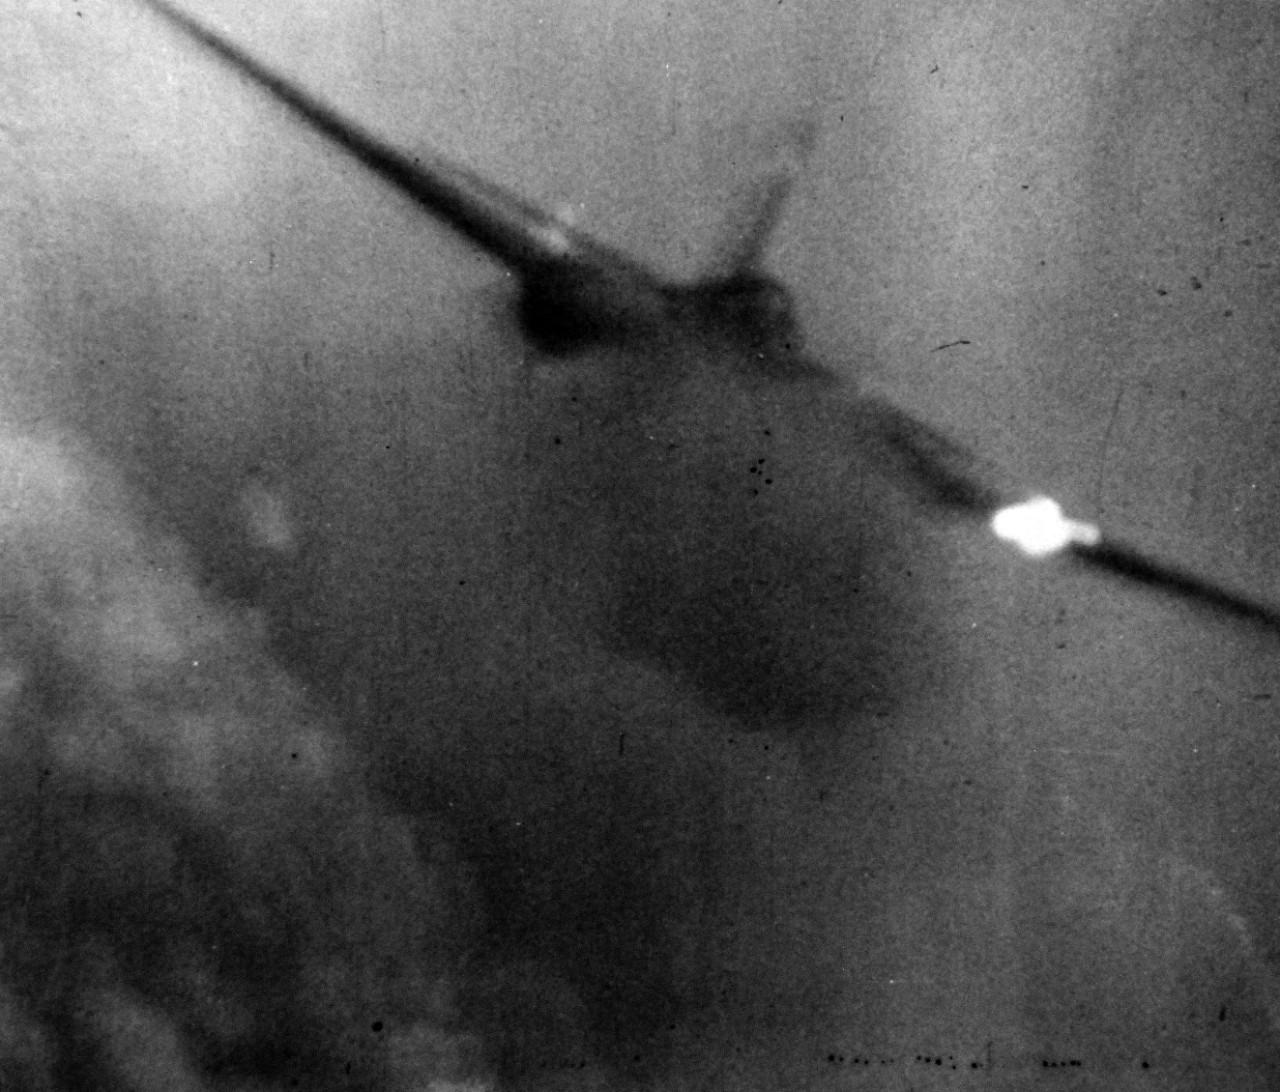 80-G-49708:   Japanese Kamikaze Attack, June 1945. Flames stream out from a Japanese Kamikaze as it is hit by anti-aircraft fire in its futile attempt to crash against the carrier.  Released June 28, 1945.   Official U.S. Navy photograph, now in the collections of the National Archives.  